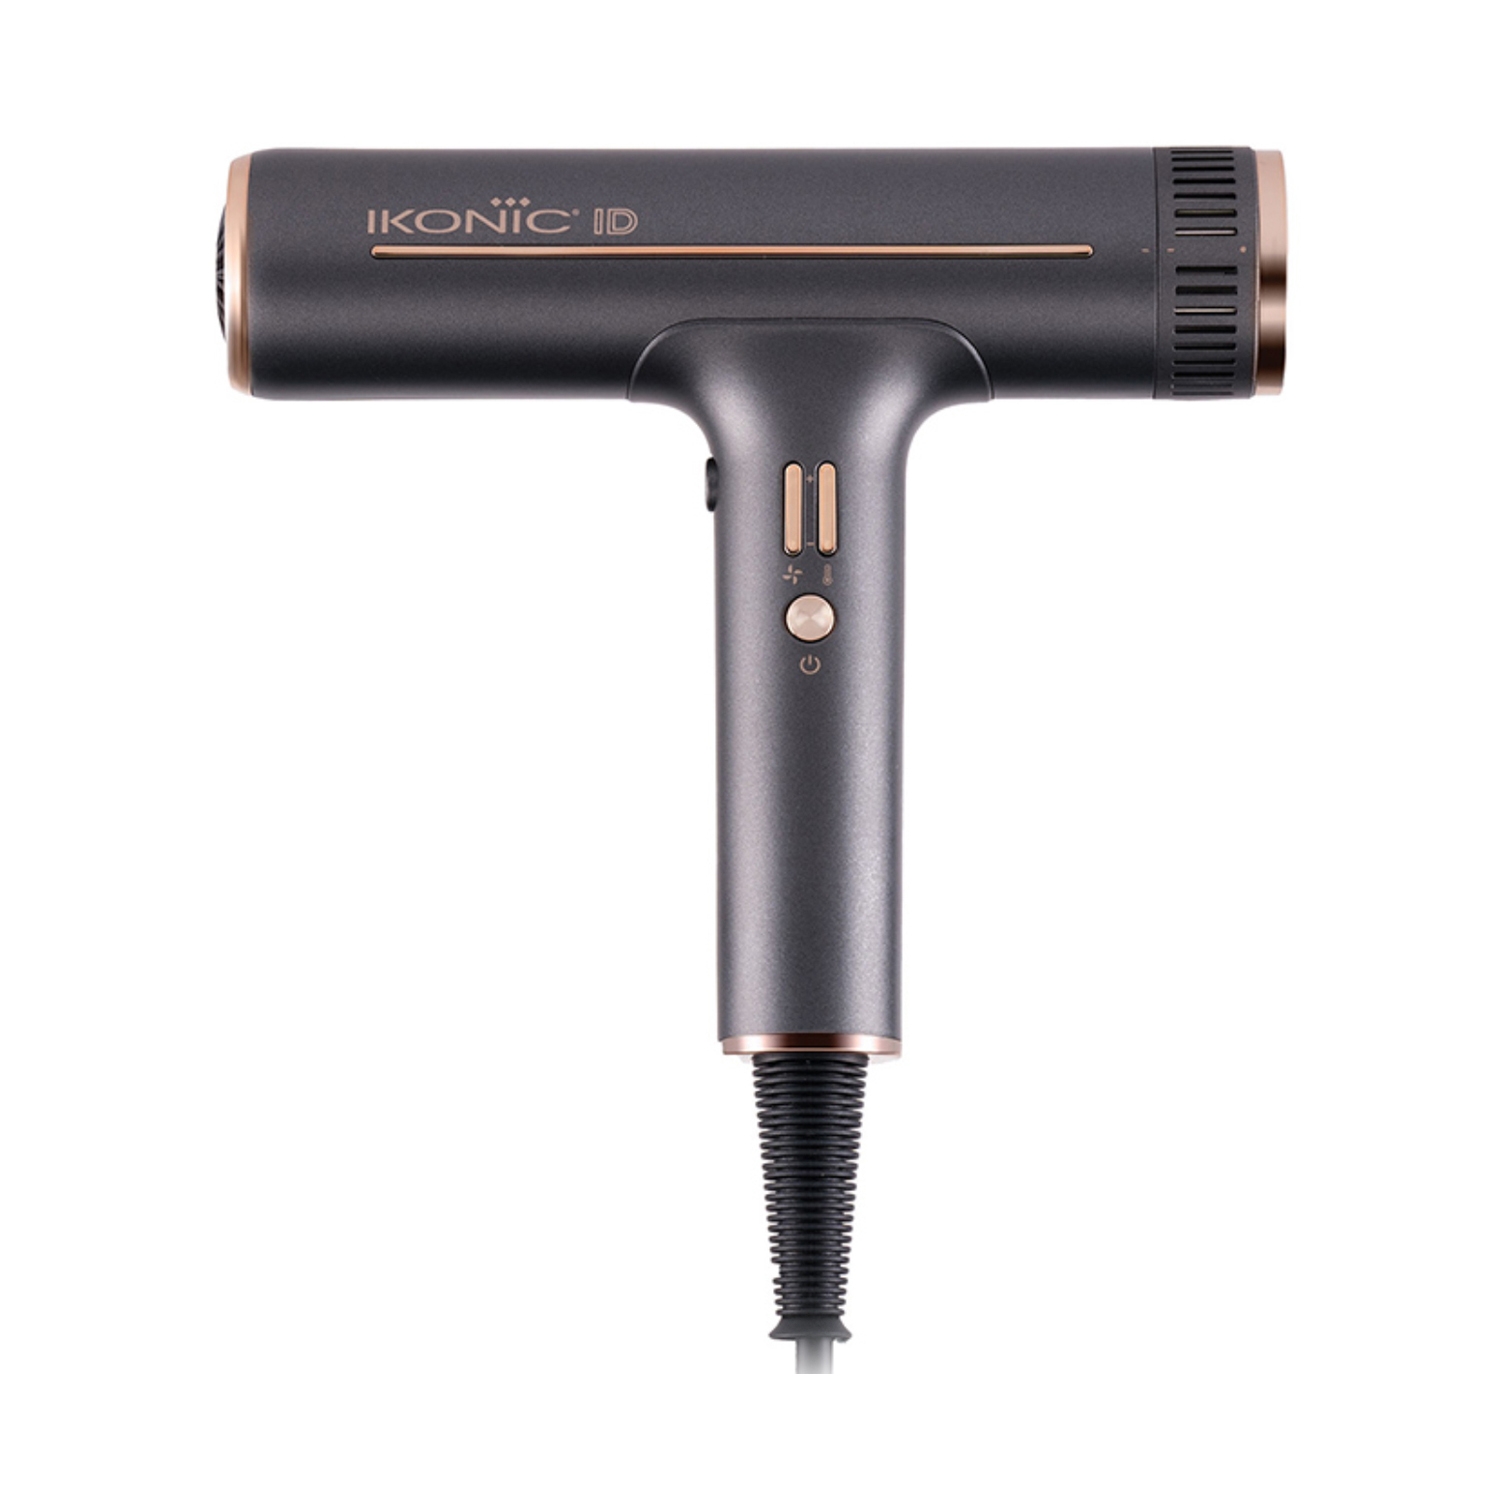 Ikonic Professional | Ikonic Professional Hair Dryer - ID Black and Gold